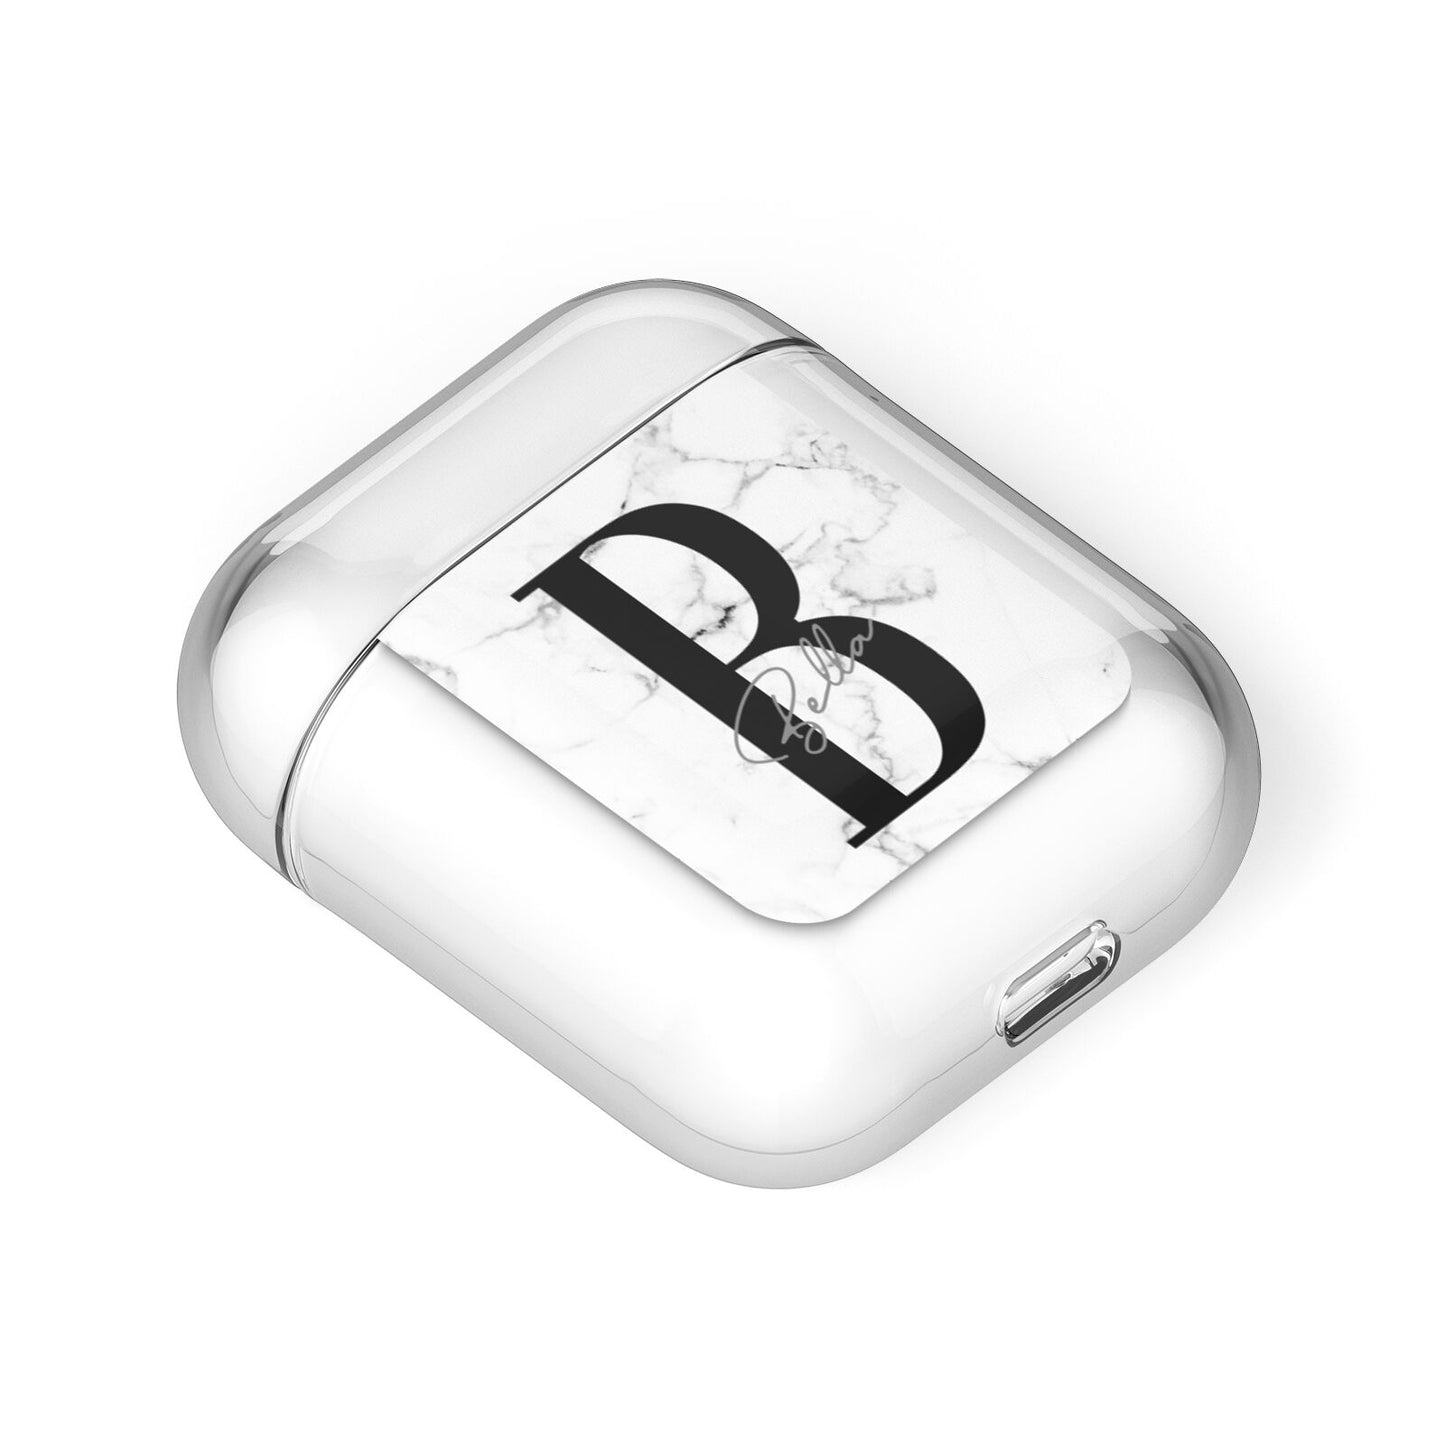 Monogrammed White Marble AirPods Case Laid Flat